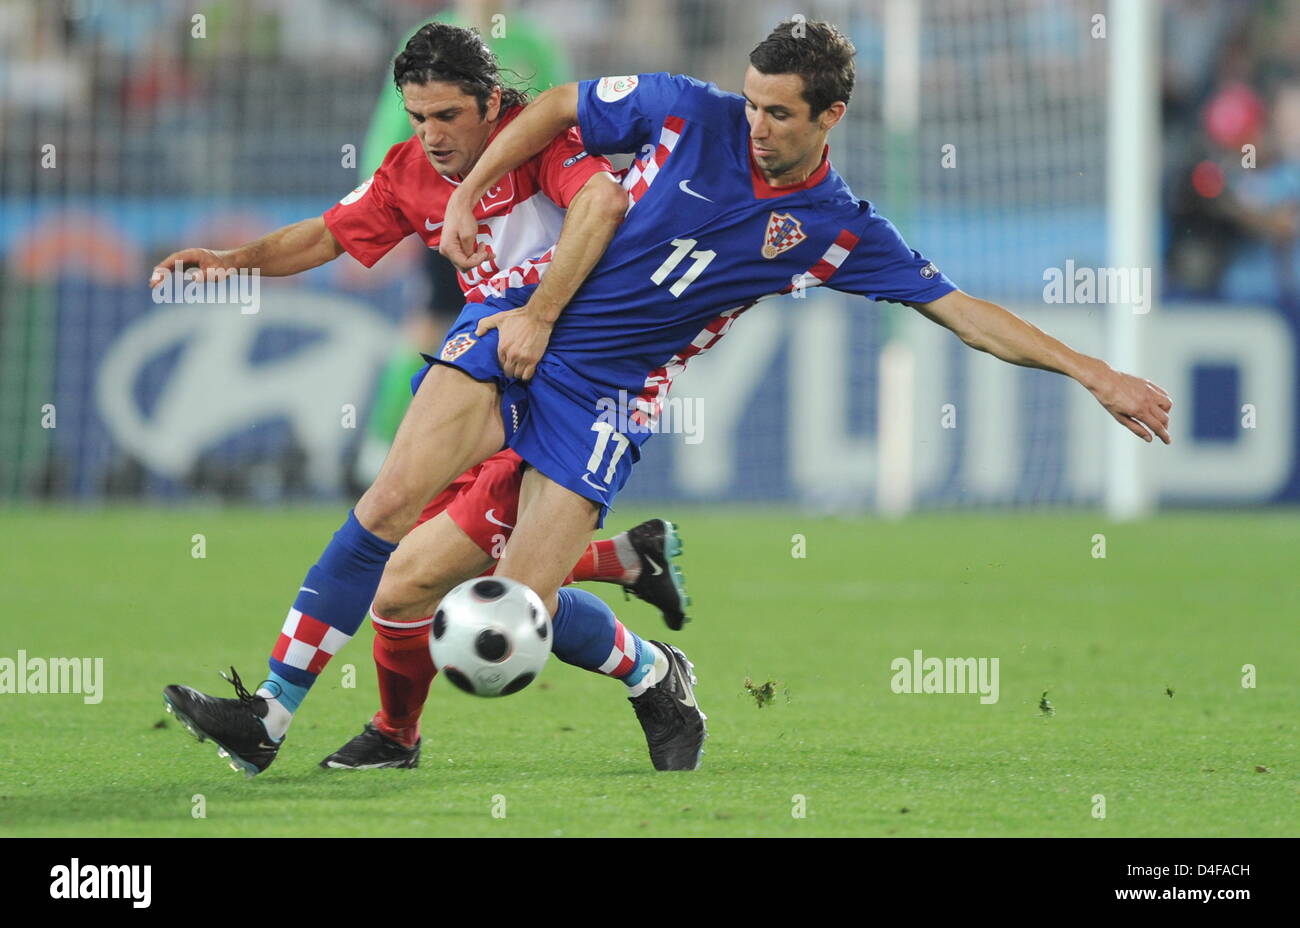 Darijo Srna (R) of Croatia vies with Ugur Boral of Turkey during the UEFA EURO 2008 quarter final match between Croatia and Turkey at the Ernst Happel stadium in Vienna, Austria, 20 June 2008. Turkey won 3:1 in penalty shootout. Photo: Achim Scheidemann dpa +please note UEFA restrictions particulary in regard to slide shows and ÒNo Mobile ServicesÒ +++###dpa###+++ Stock Photo